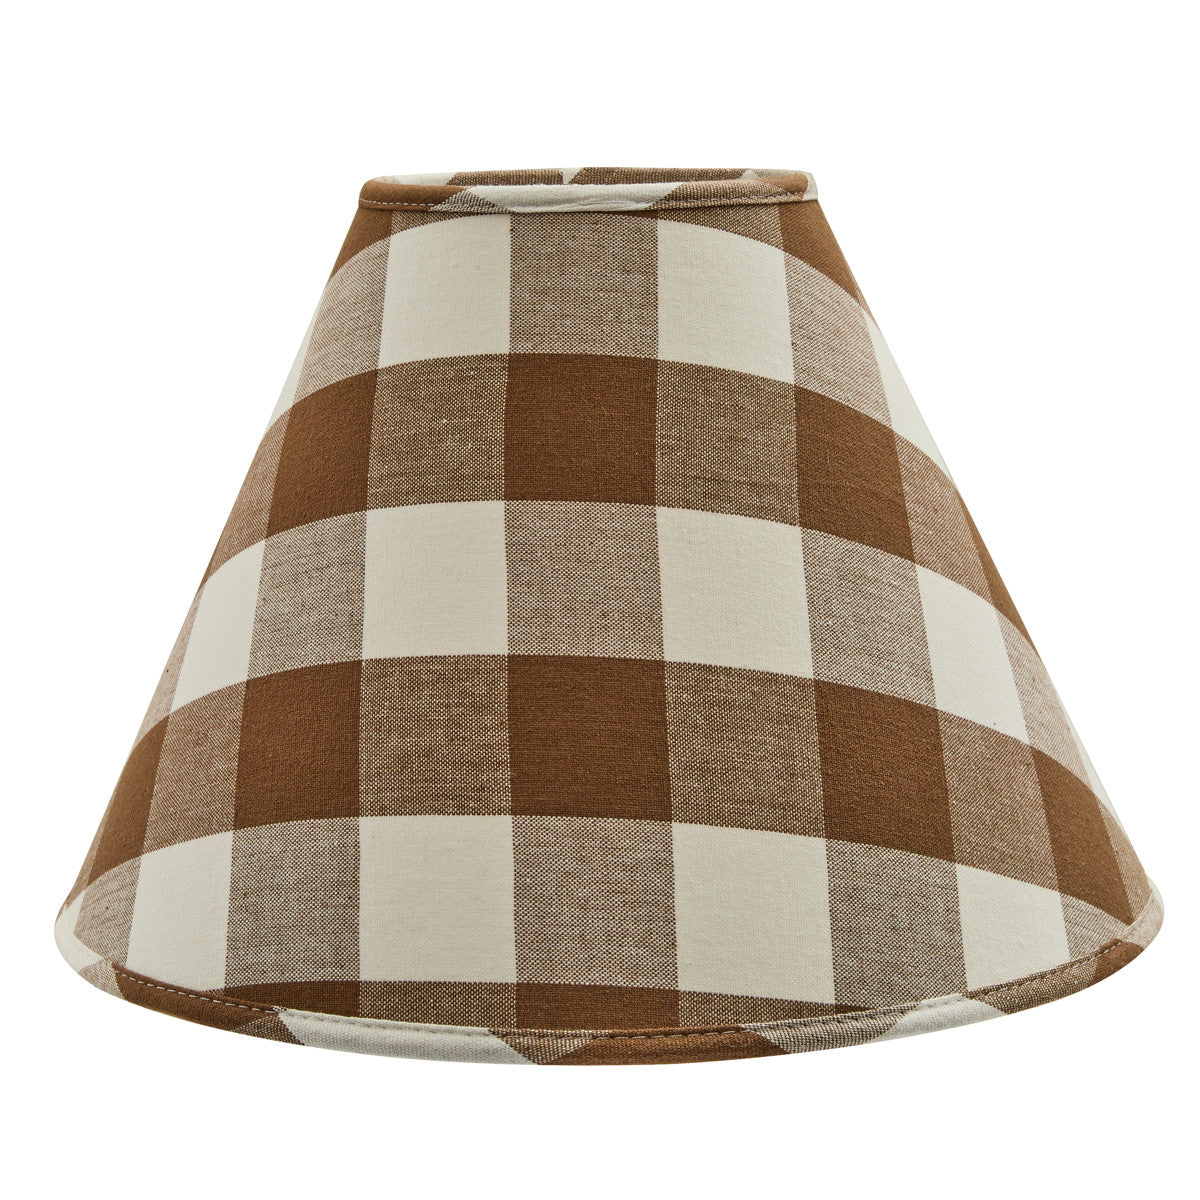 Wicklow Check Brown & Cream Lamp Shade - 12" Set of 2 Park Designs